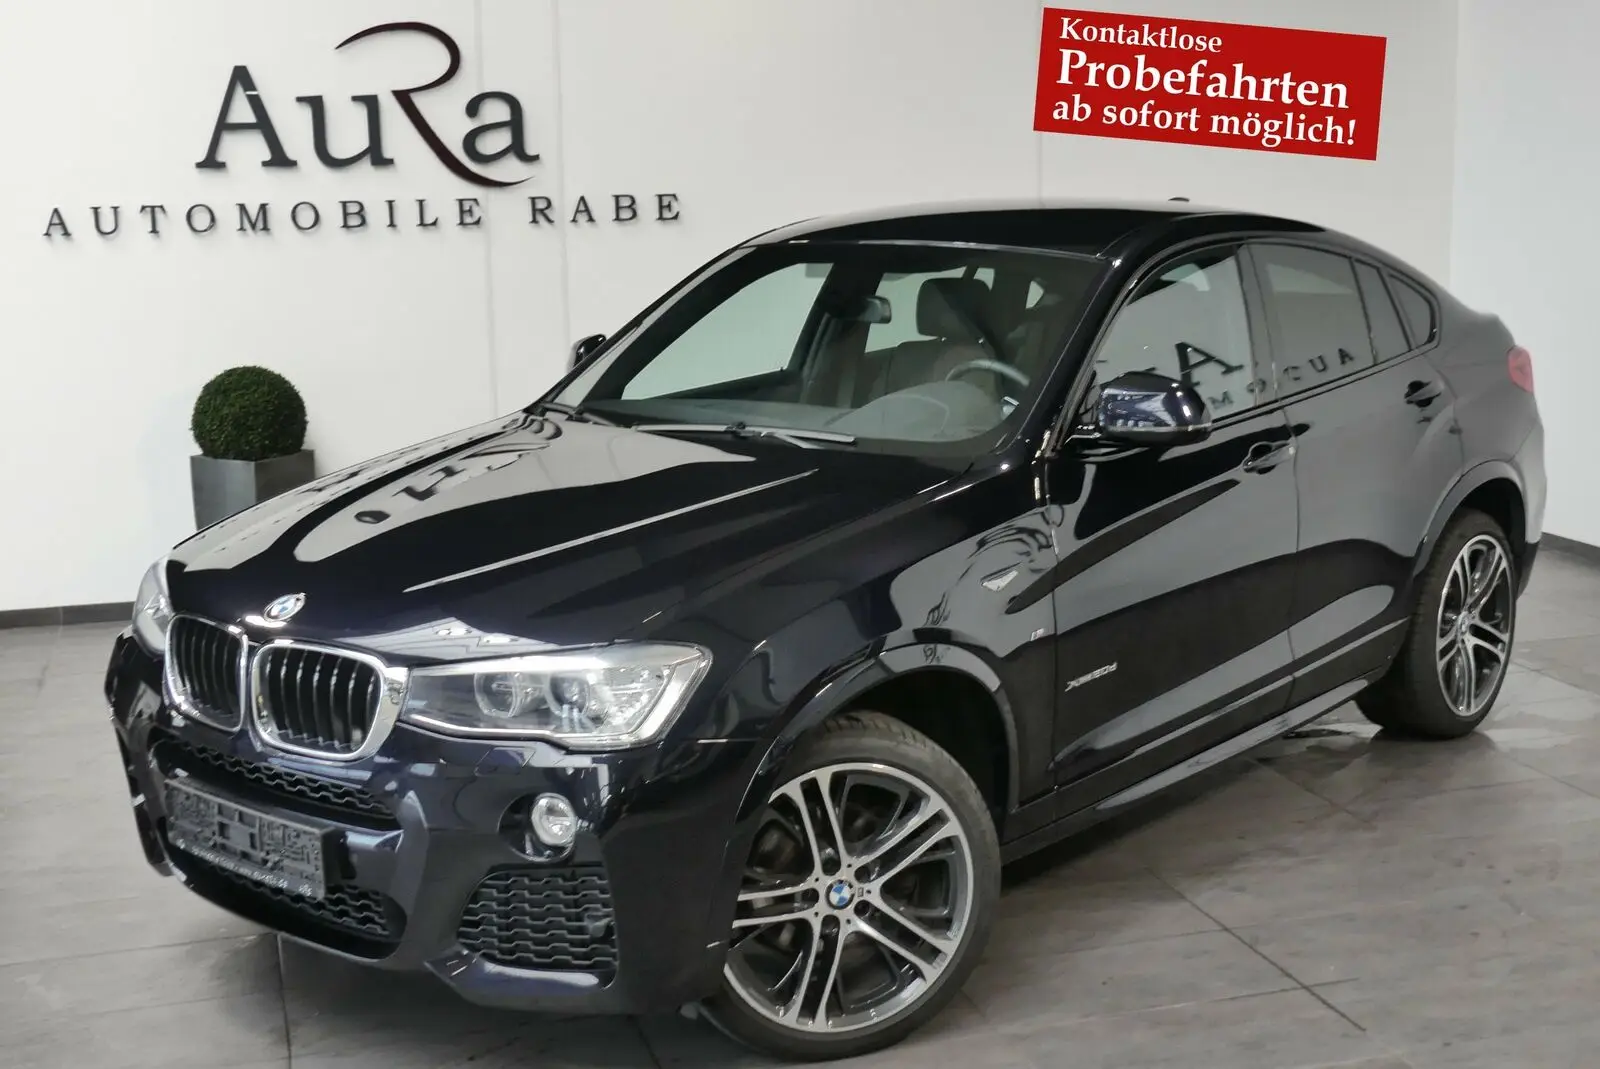 Good Quality At Cheap Used Car Price BMW X4 SUV / Off-road Vehicle / Pickup Truck Selling Used Car Online